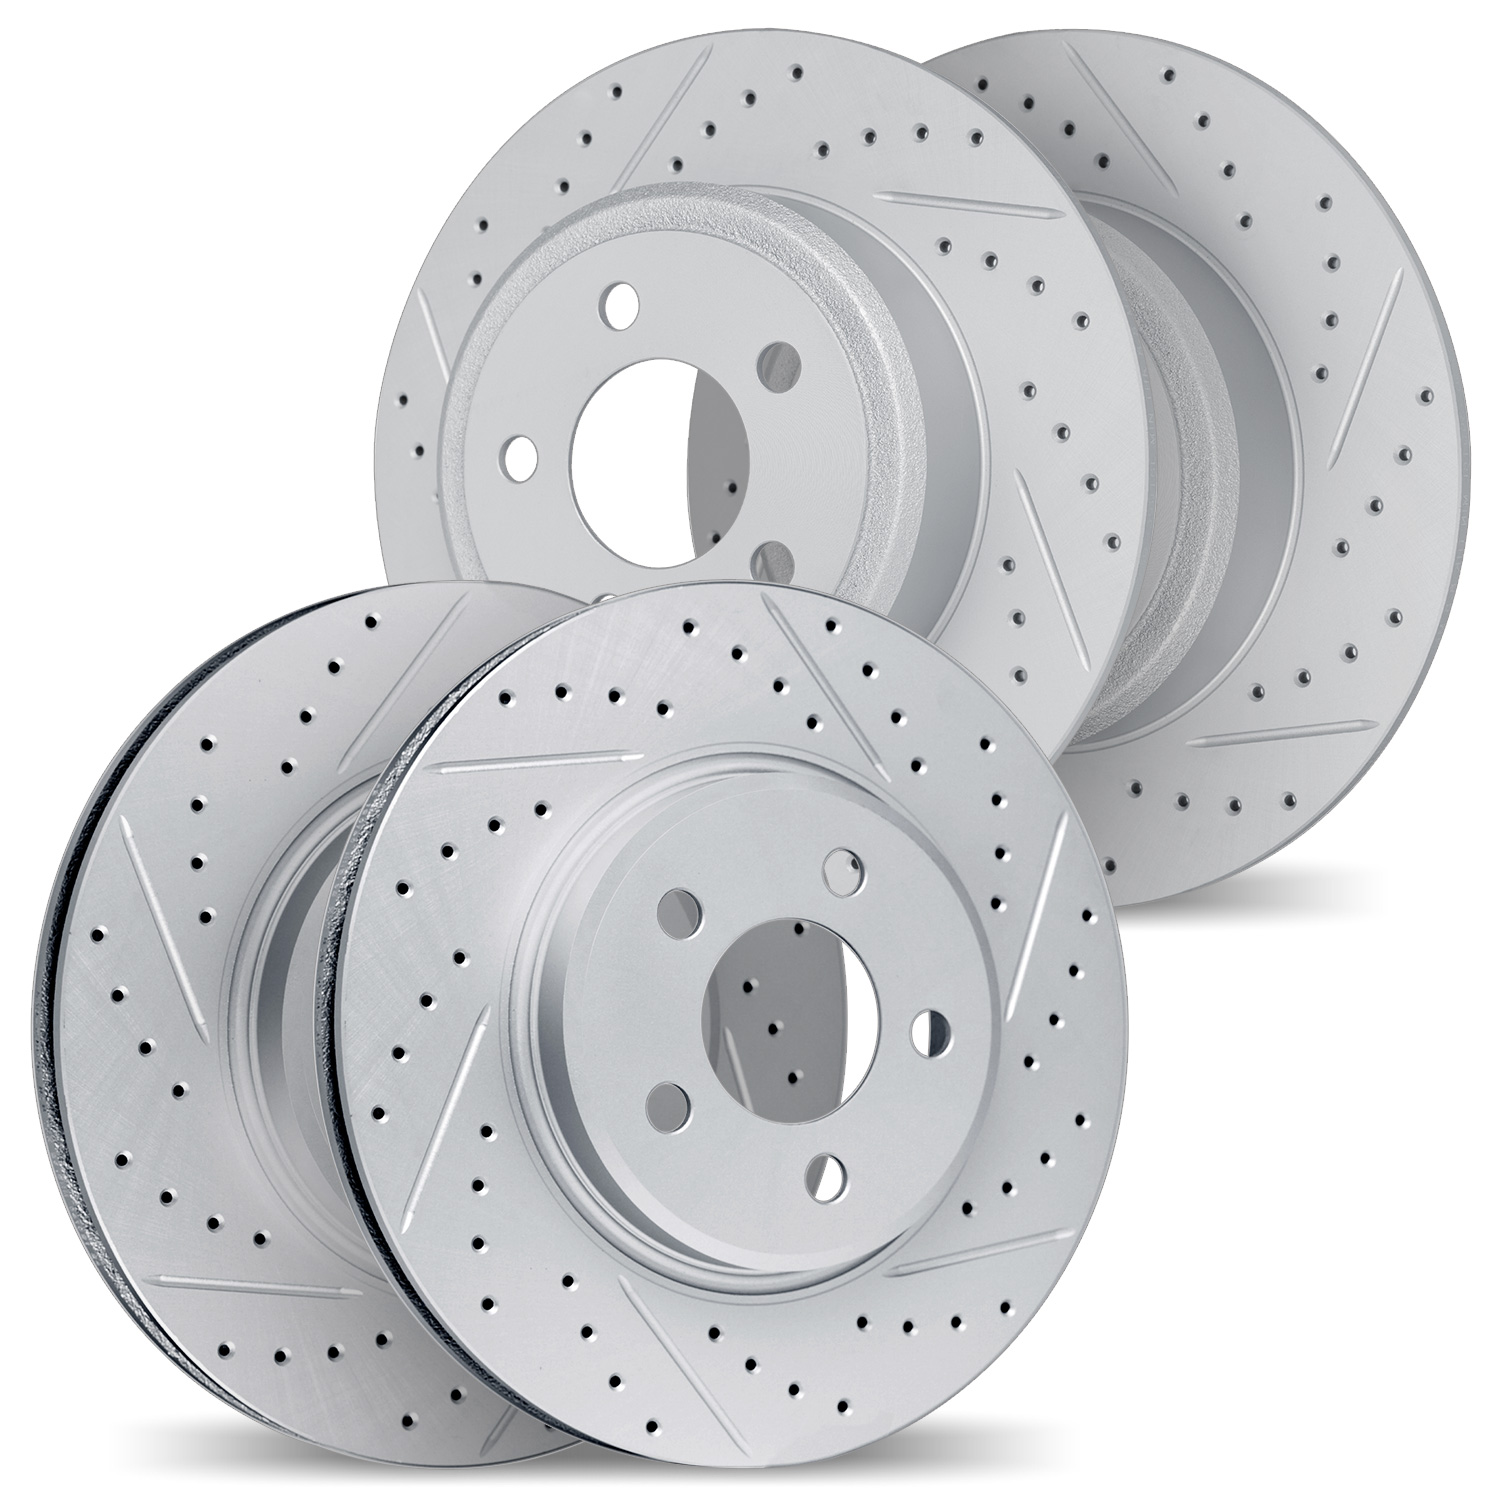 2004-74000 Geoperformance Drilled/Slotted Brake Rotors, 1999-2014 Audi/Volkswagen, Position: Front and Rear